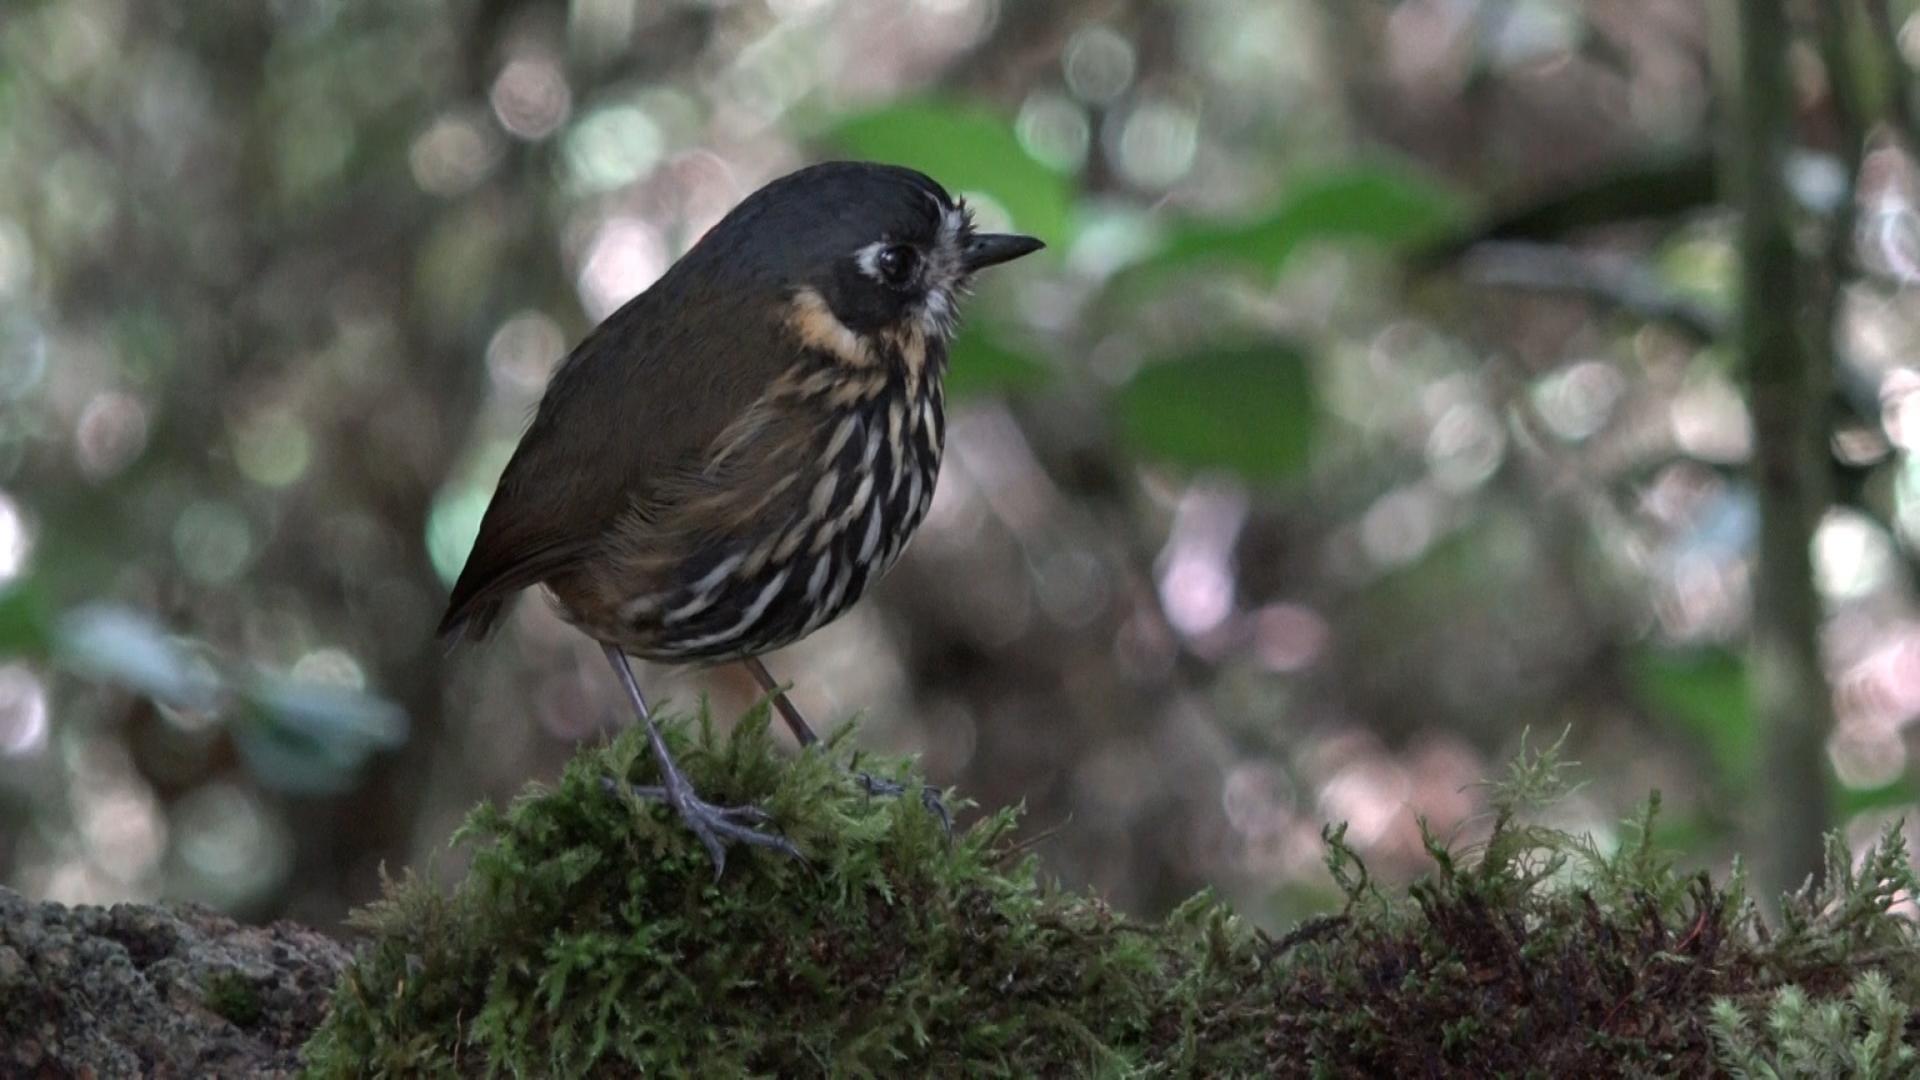 A crescent-faced antpitta at Hacienda El Bosque in Colombia. The bird dwells on the forest floor and is extremely hard to spot. Hacienda El Bosque is one of the only places where it can be seen on a regular basis.